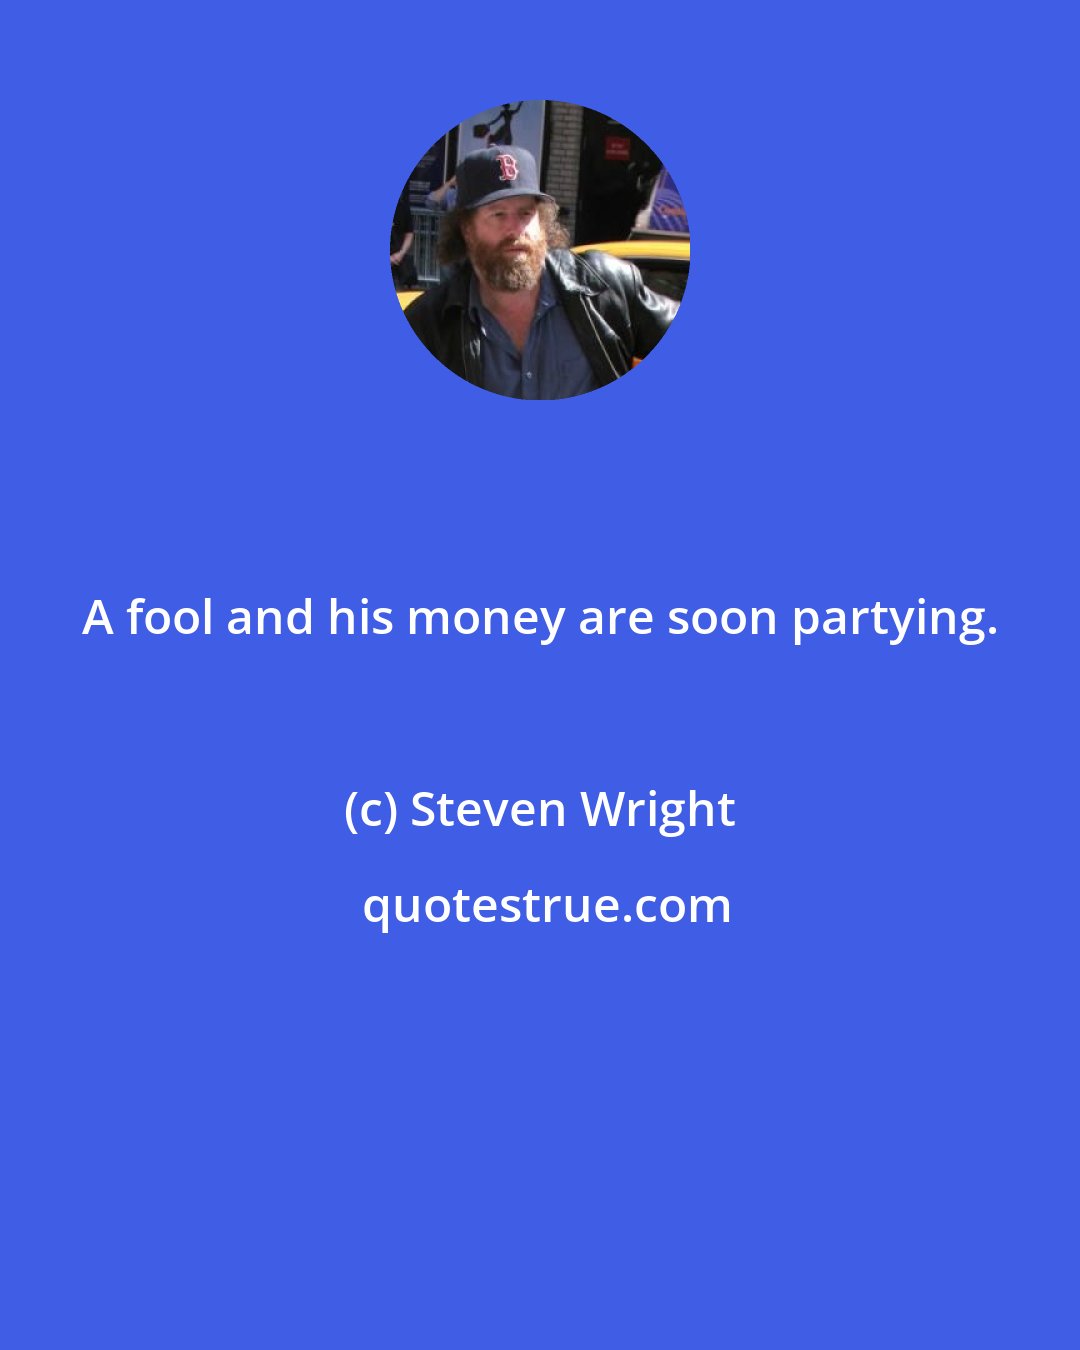 Steven Wright: A fool and his money are soon partying.